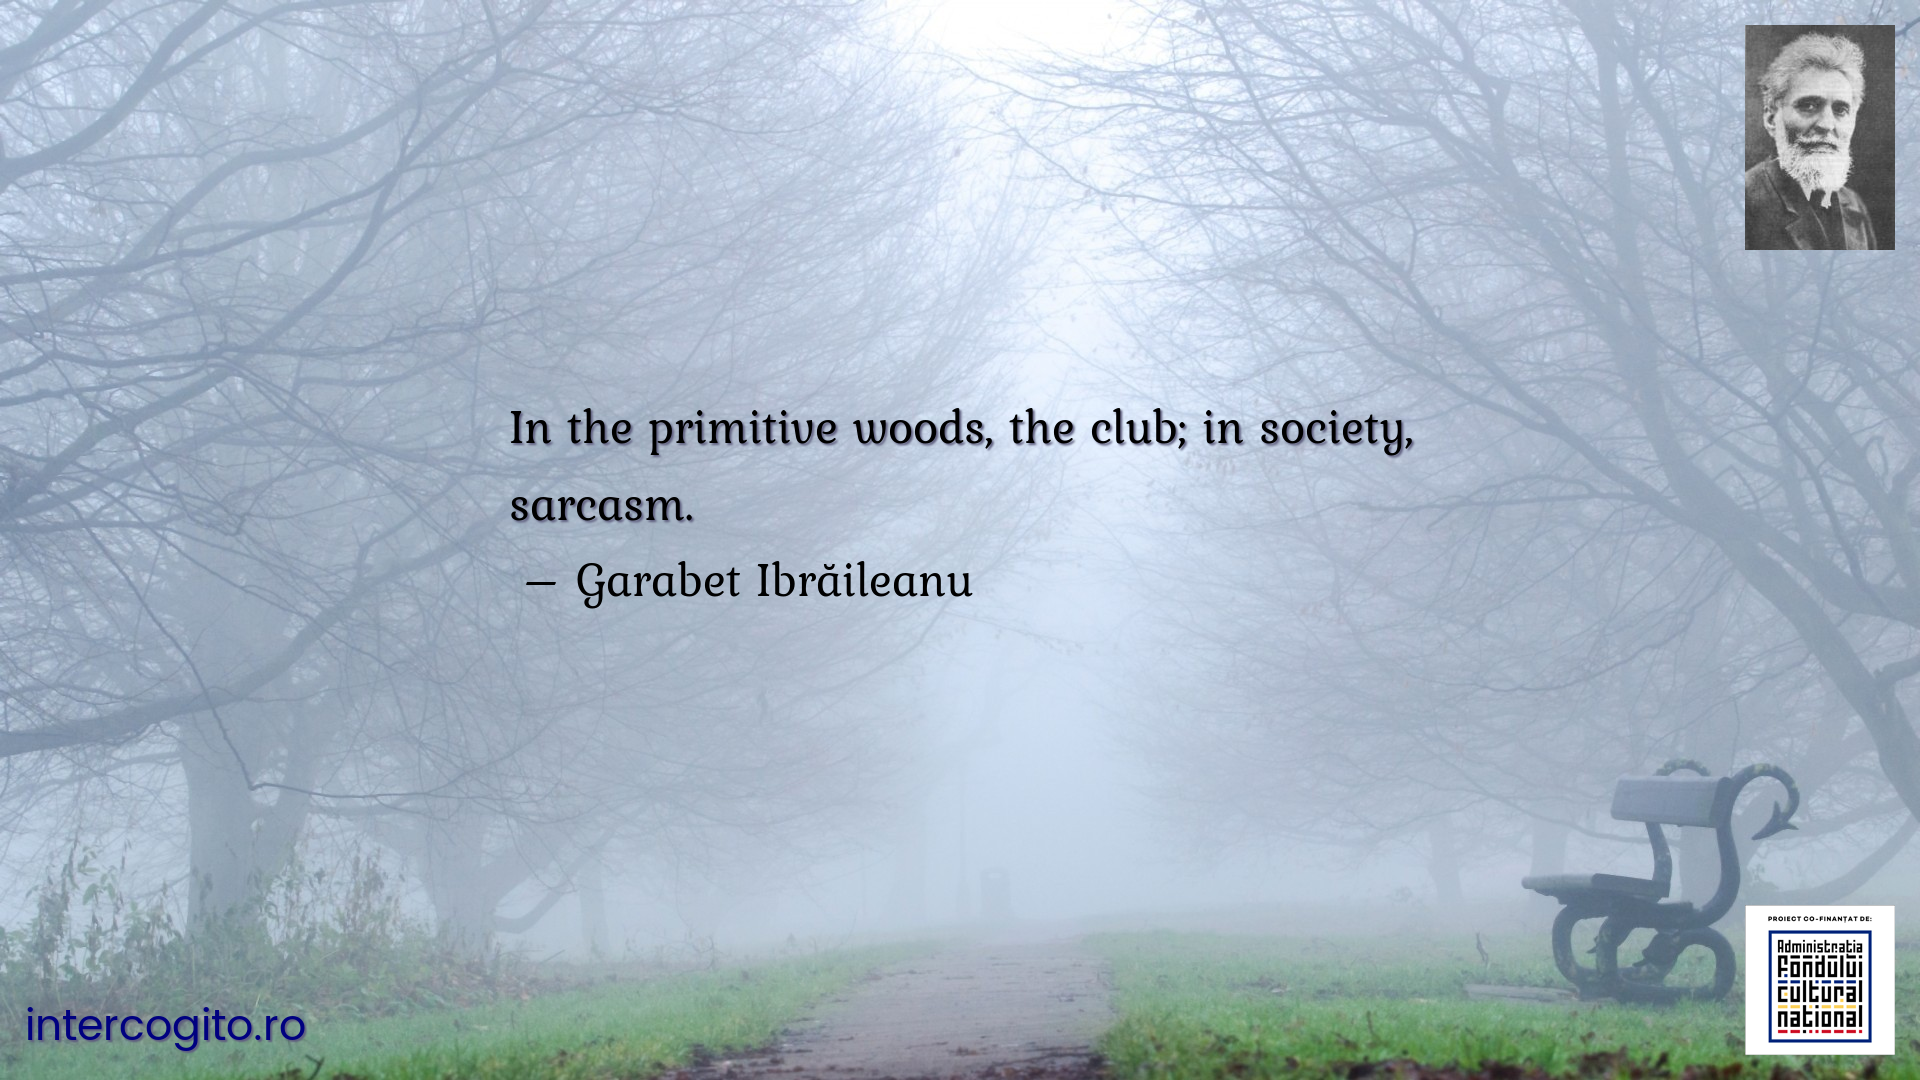 In the primitive woods, the club; in society, sarcasm.